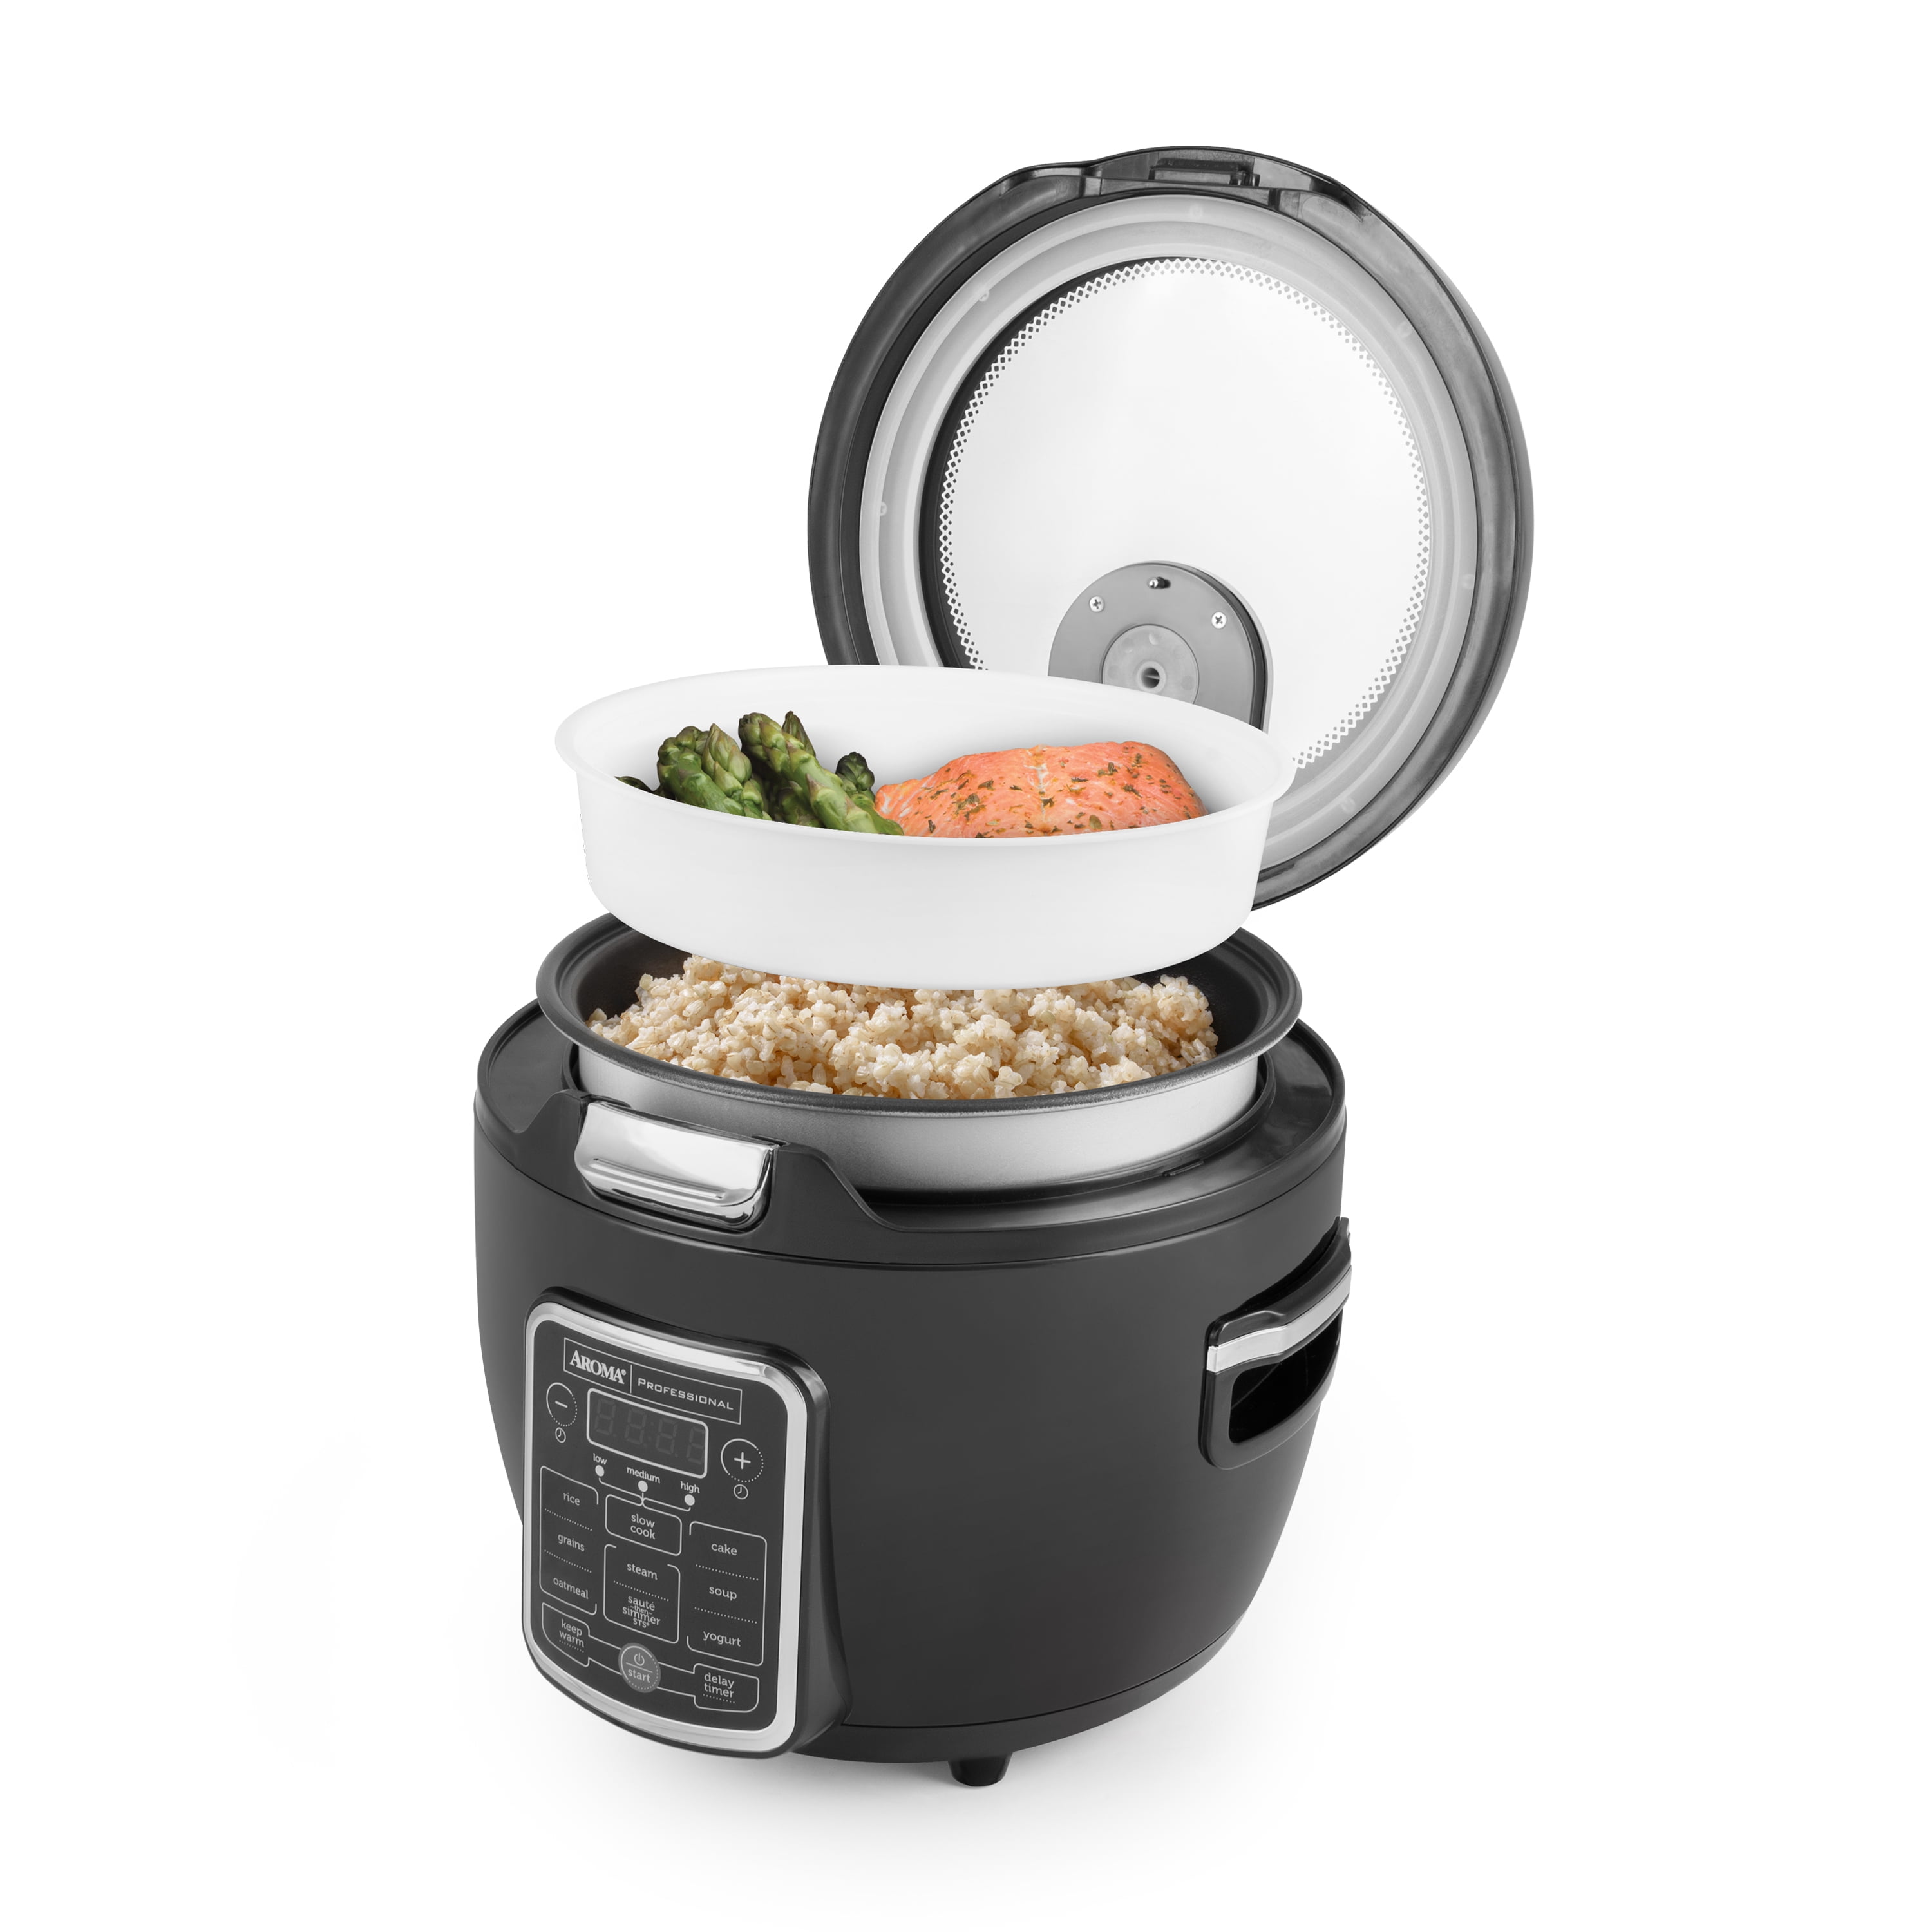 Aroma Housewares AROMA® Professional 20-Cup (Cooked) / 5Qt. Digital Rice  Cooker, Steamer, and Slow Cooker Pot with 10 Smart Cooking Modes, Including